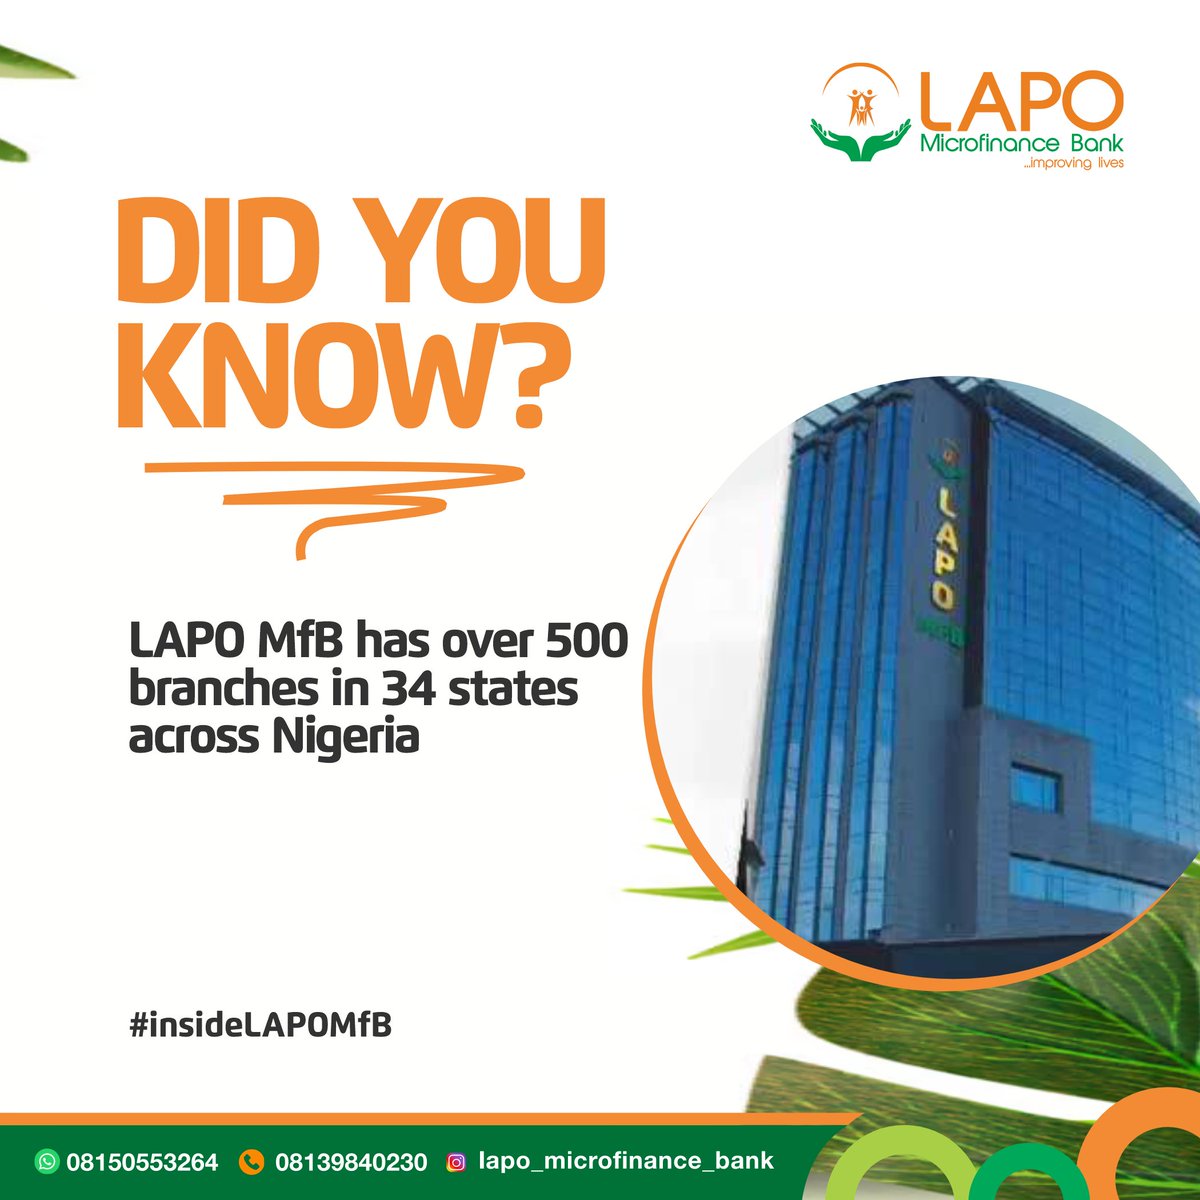 LAPO MfB is Growing Bigger and Stronger

We are here to support your financial journey, wherever you are in Nigeria! 

To explore our loan and savings products, you can visit a branch near you lapo-nigeria.org/lapo-branch-di… or call 08139840230. 

#LAPOMfB #ImprovingLives